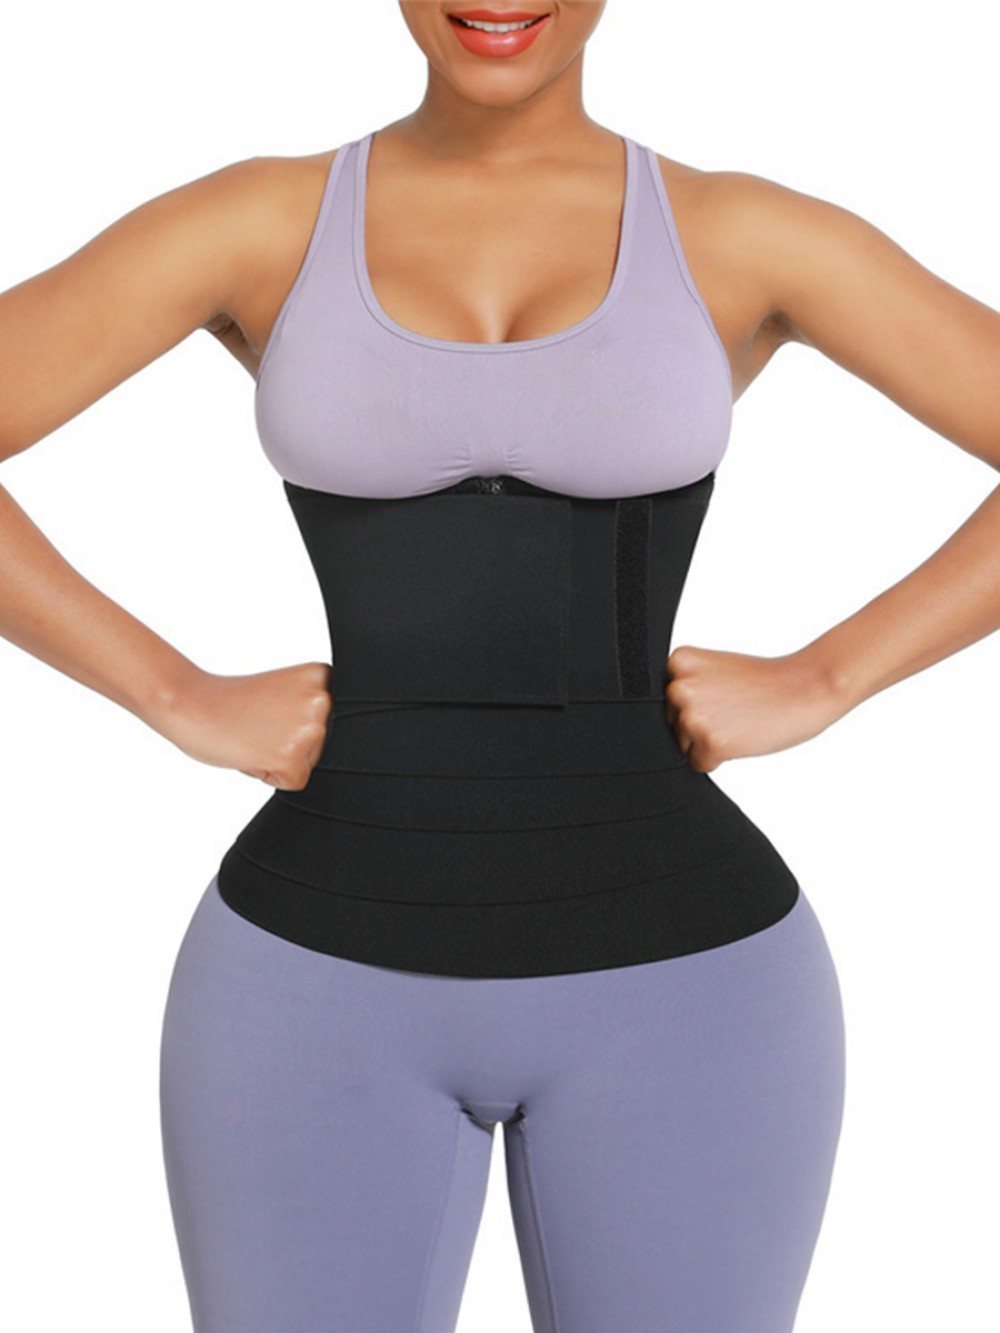 New 2 In 1 Waist Trainer Wrap For Women Lose Weight Tummy Trimmer